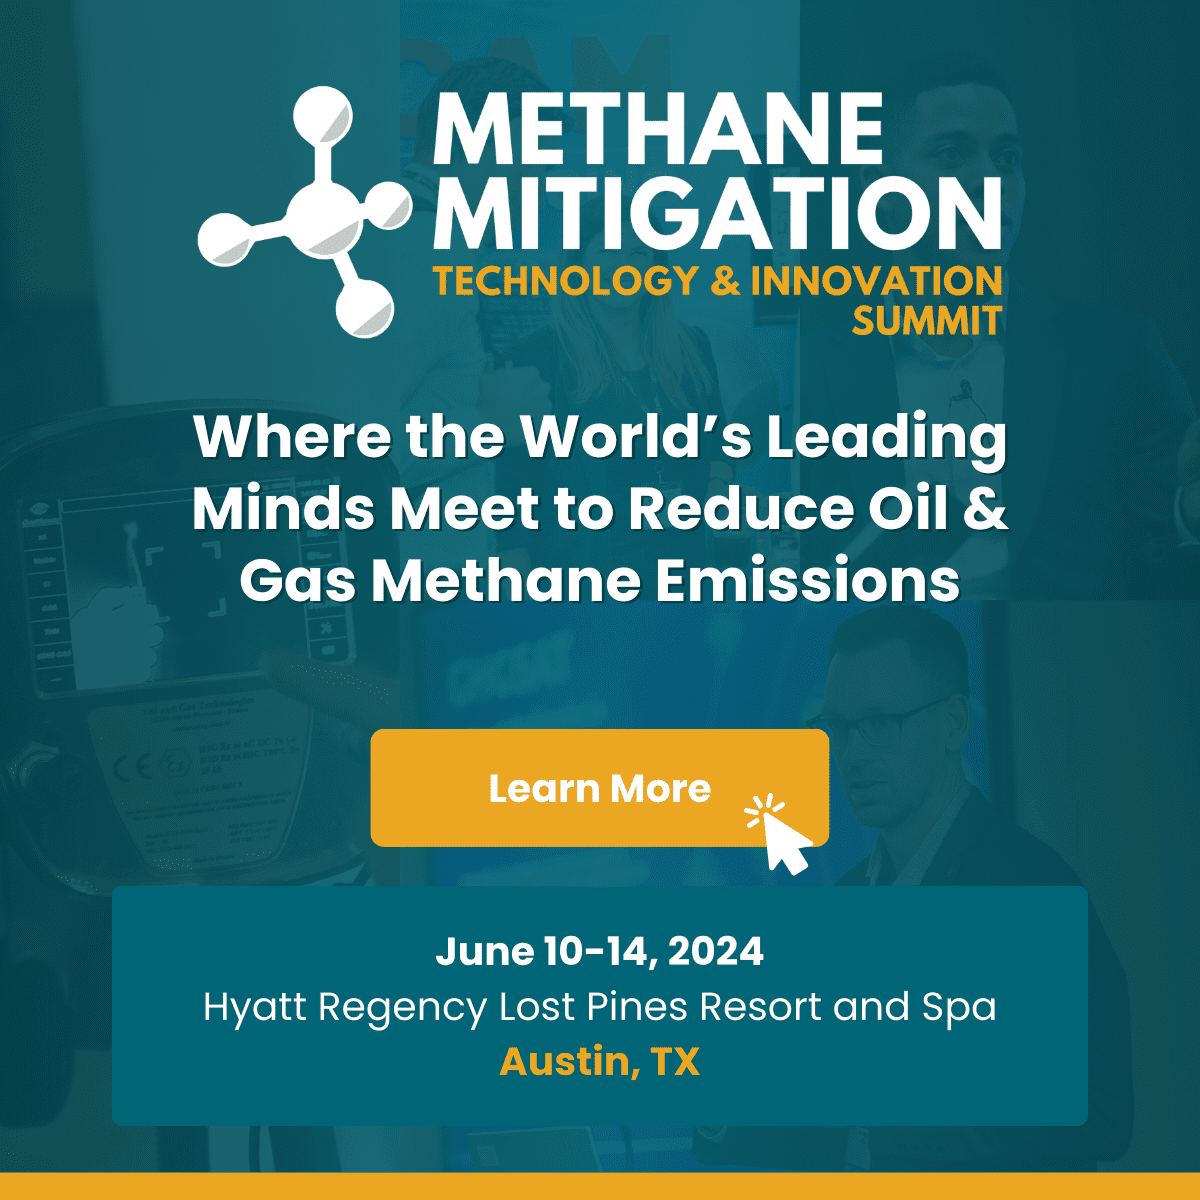 Where the World’s Leading Minds Meet to Reduce Oil & Gas Methane Emissions